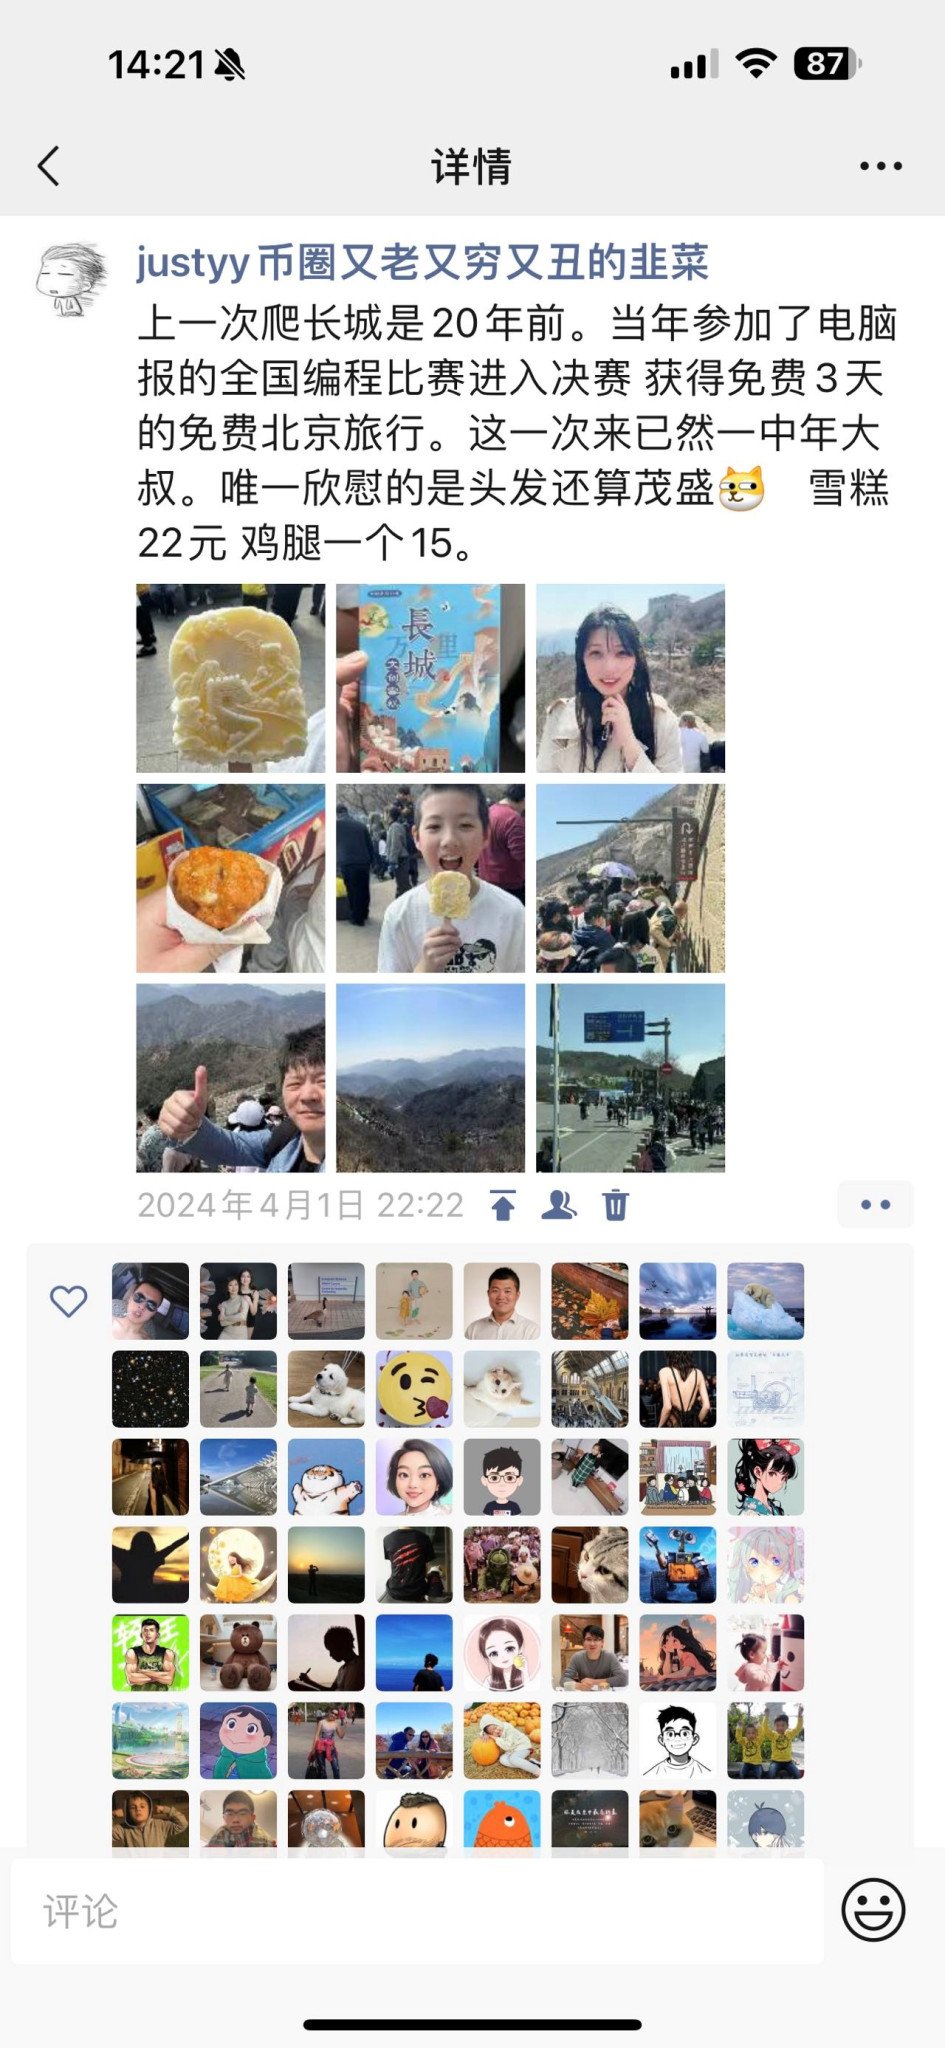  Great wall wechat moment scaled Not a hero without visiting the Great Wall: Badaling Great Wall Hero Peak Photo information 